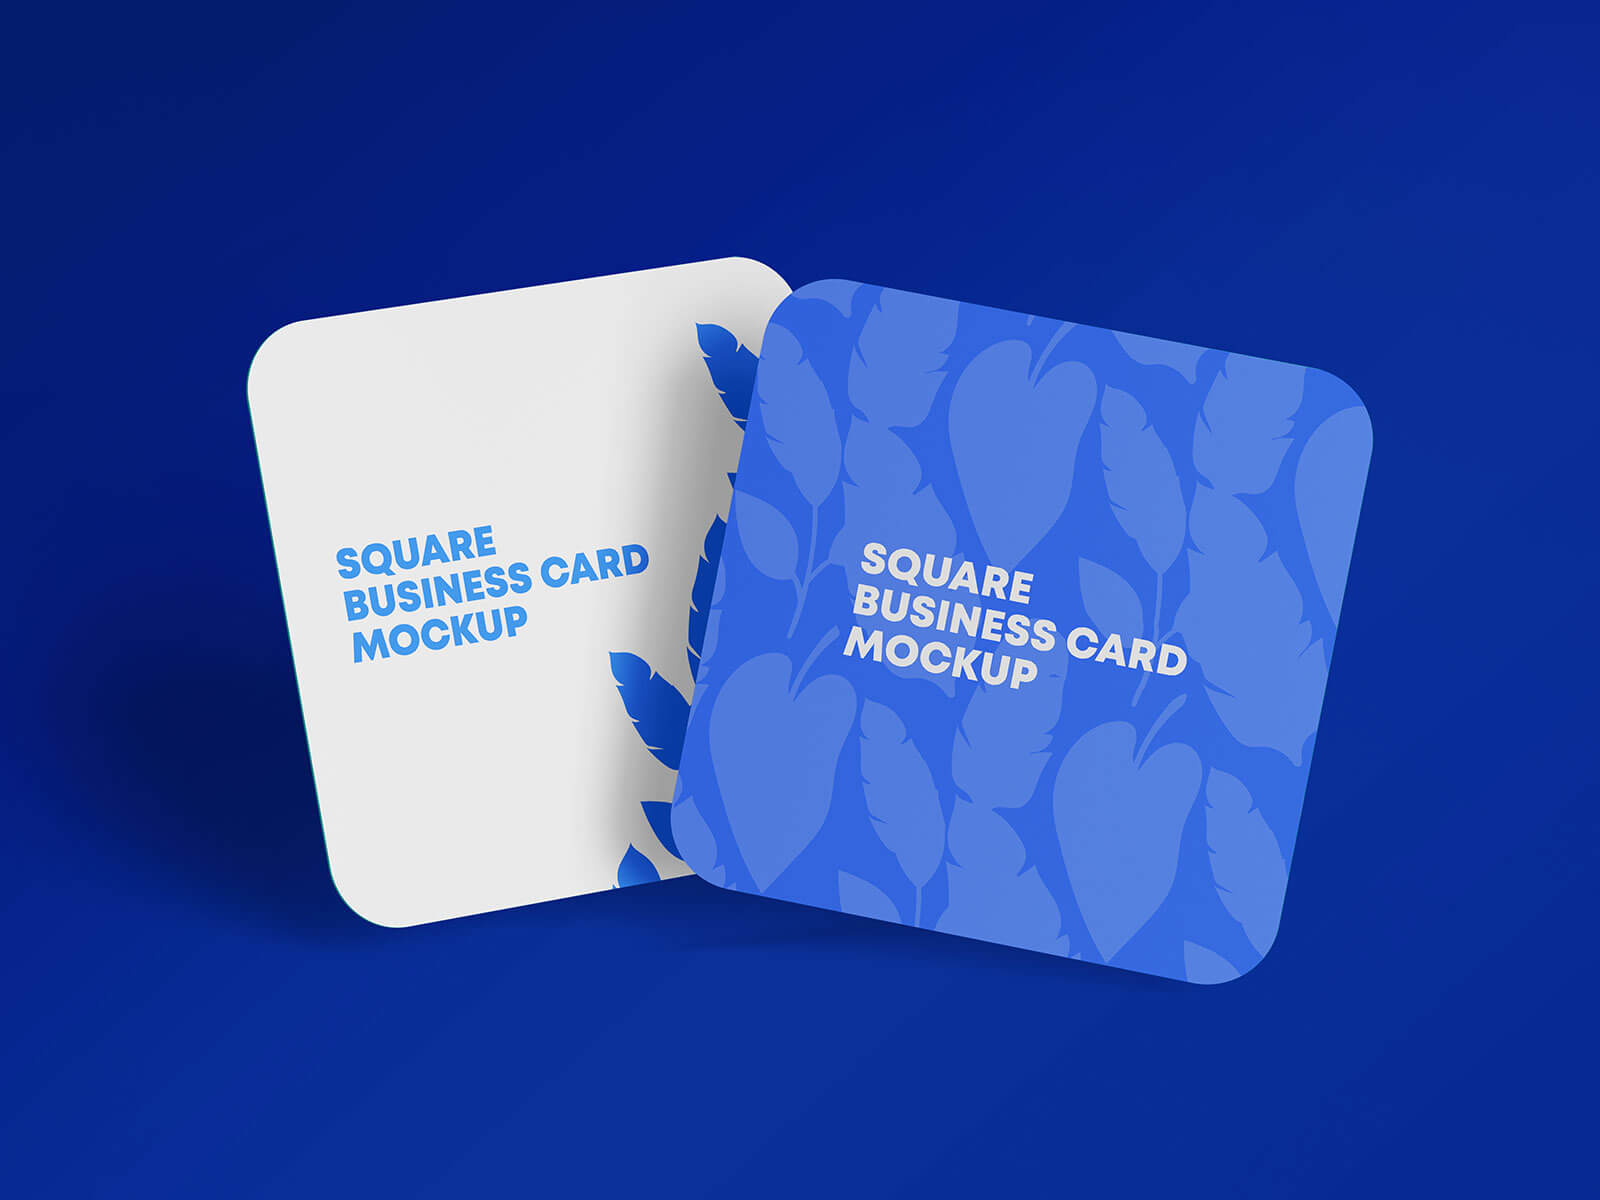 square business cards rounded corners 3